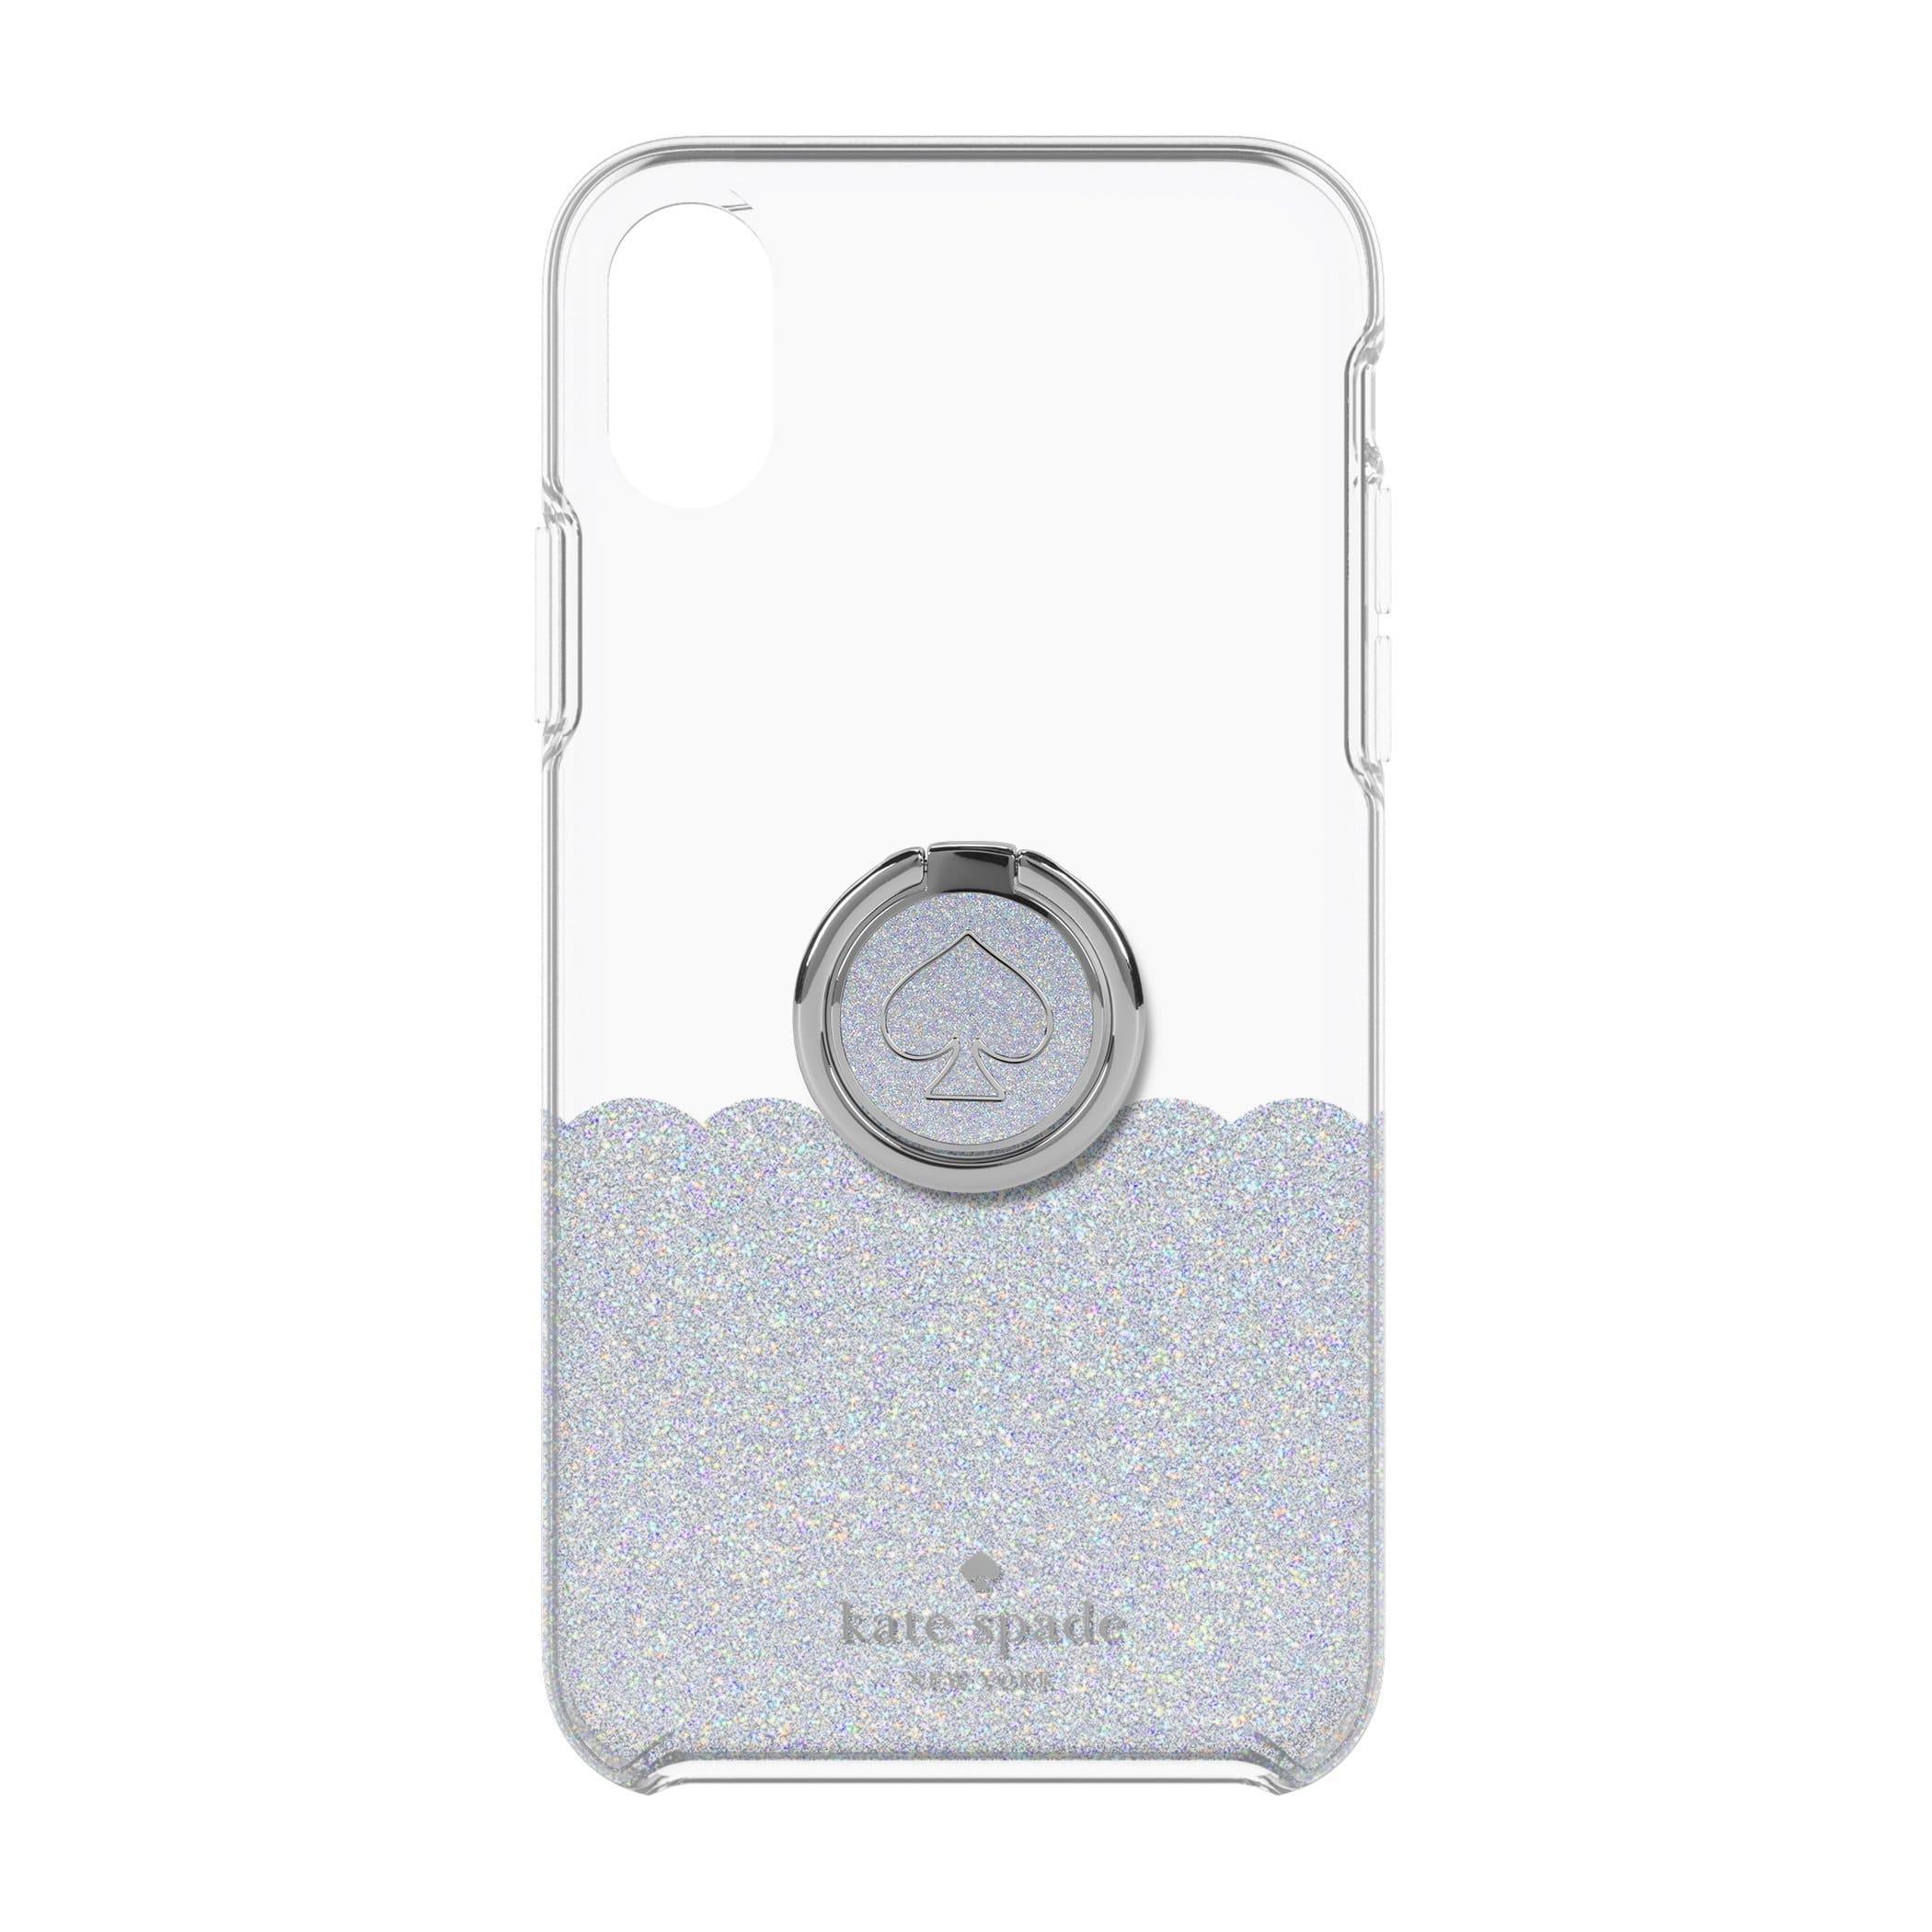 kate spade new york iphone xs x max gift set ring stand protective hardshell case scallop mermaid glitter clear